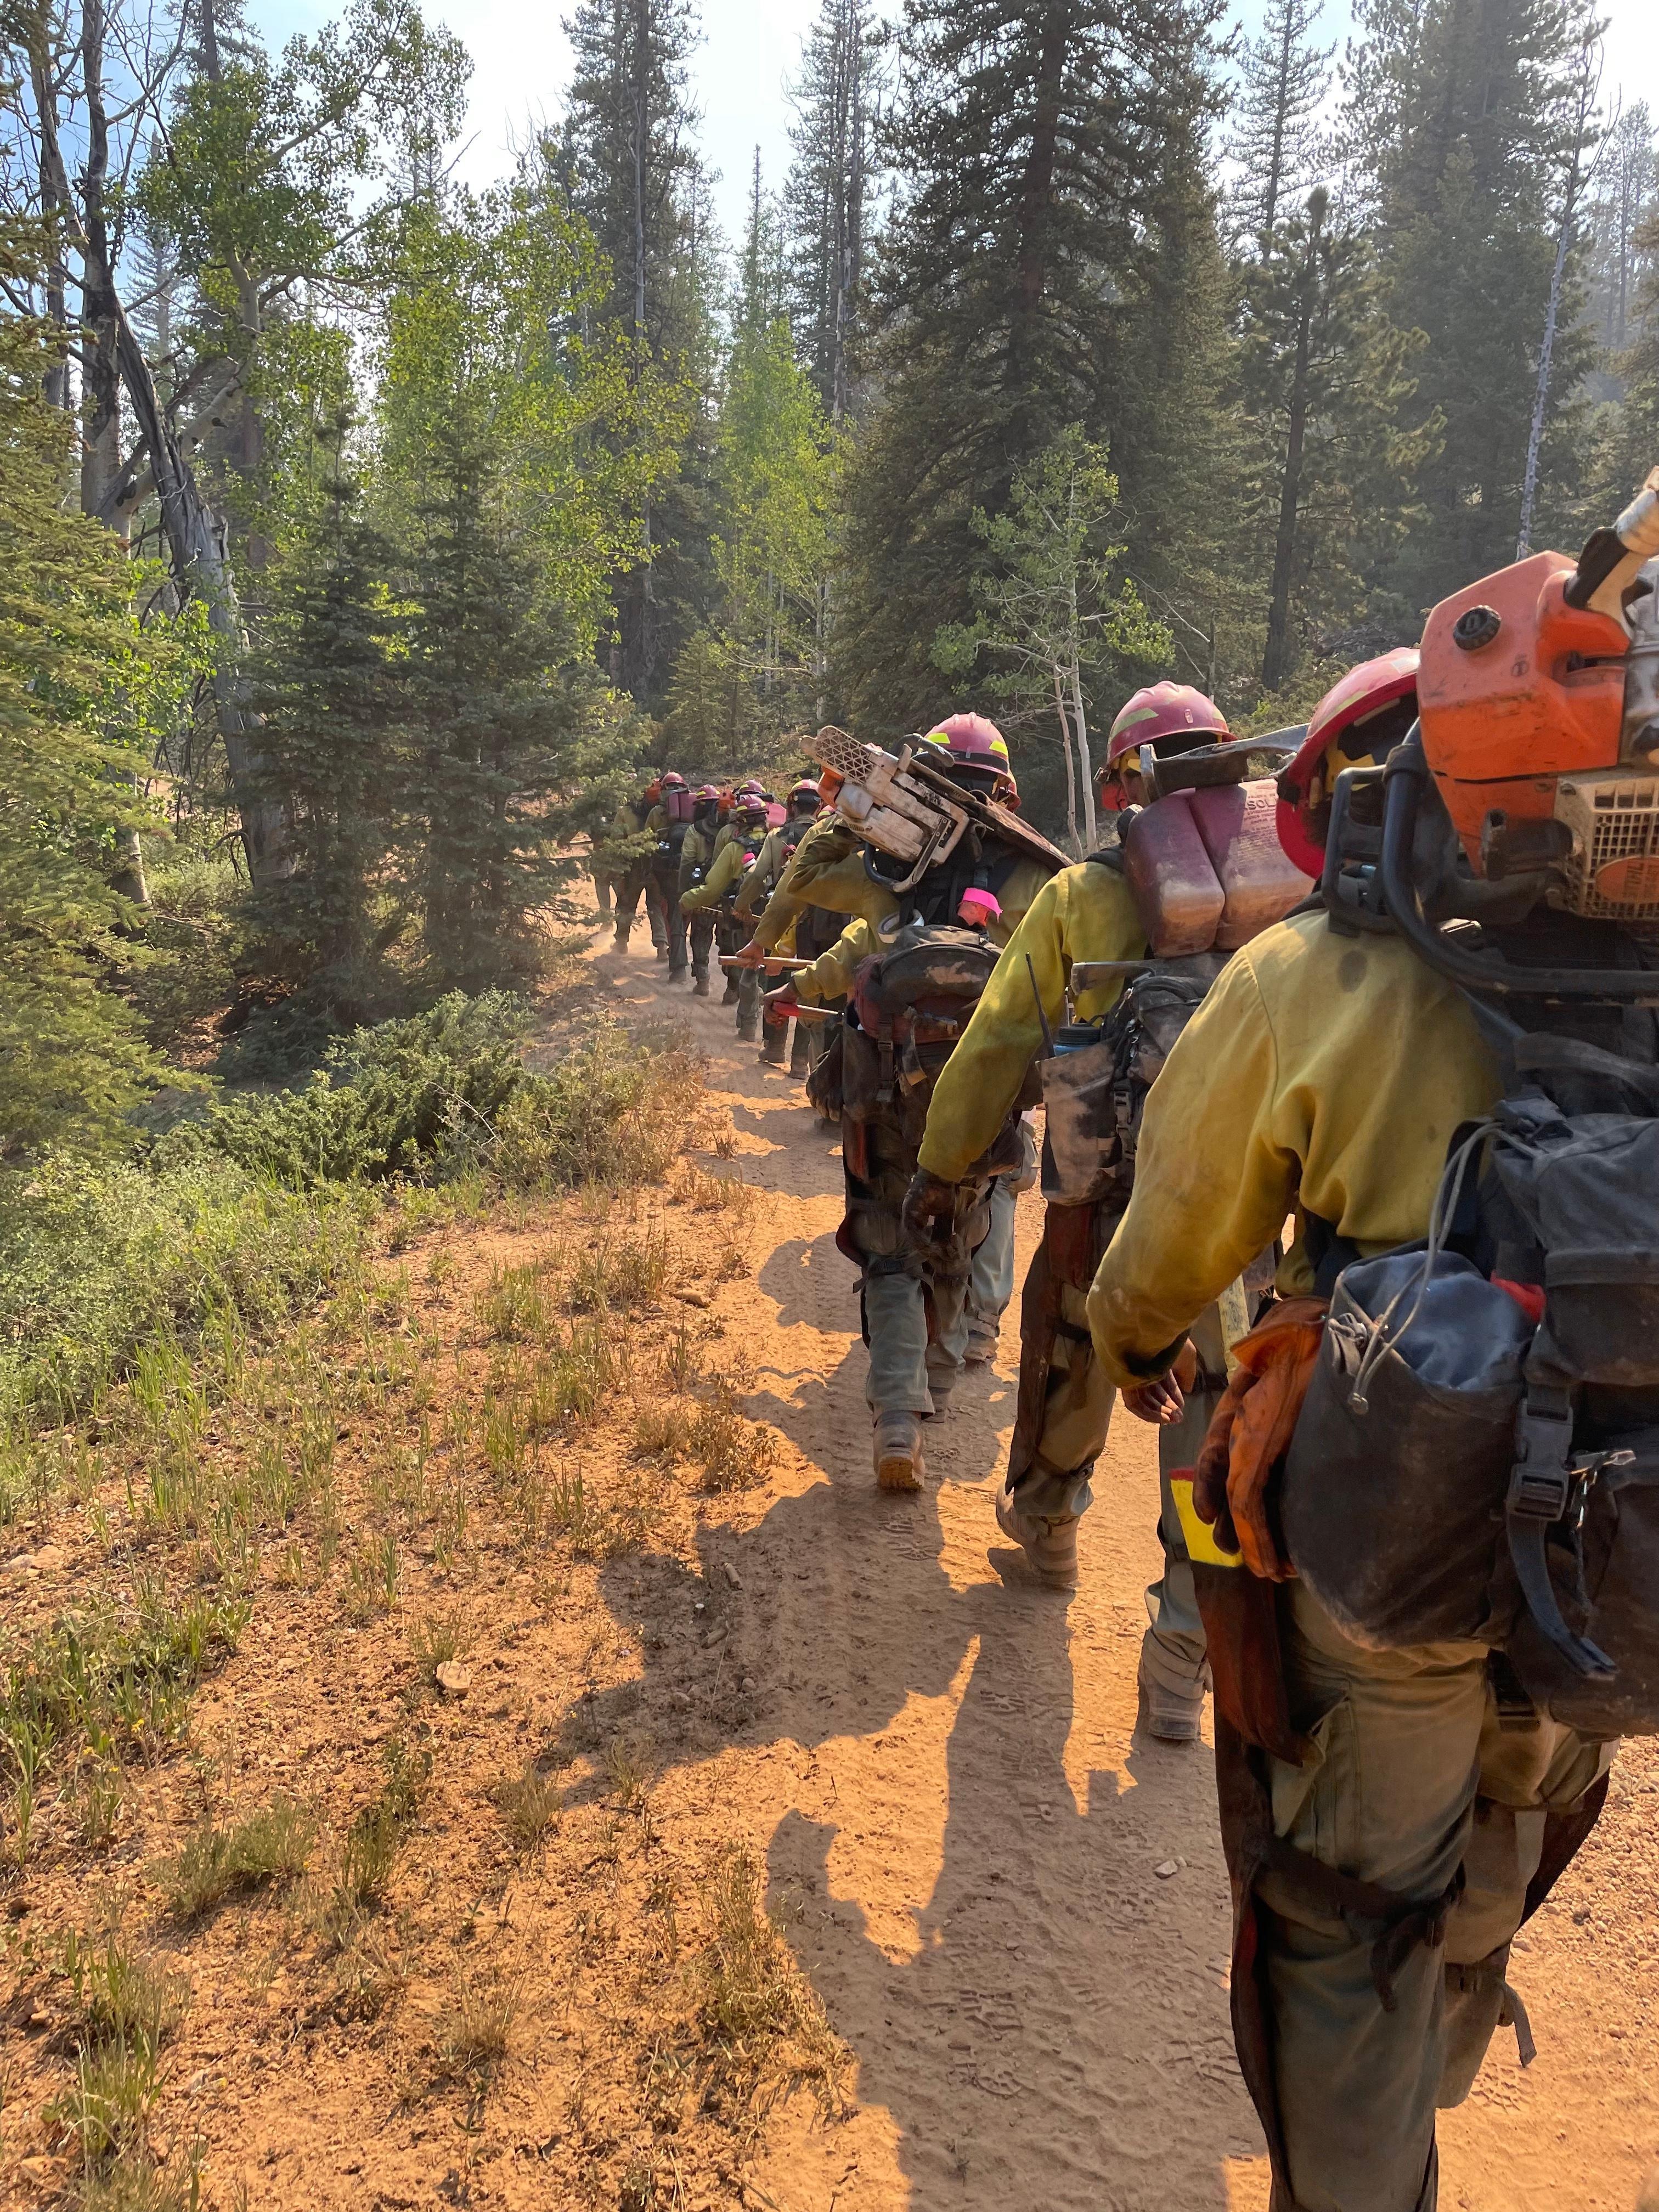 A crew of firefighters hike along a dirt road.